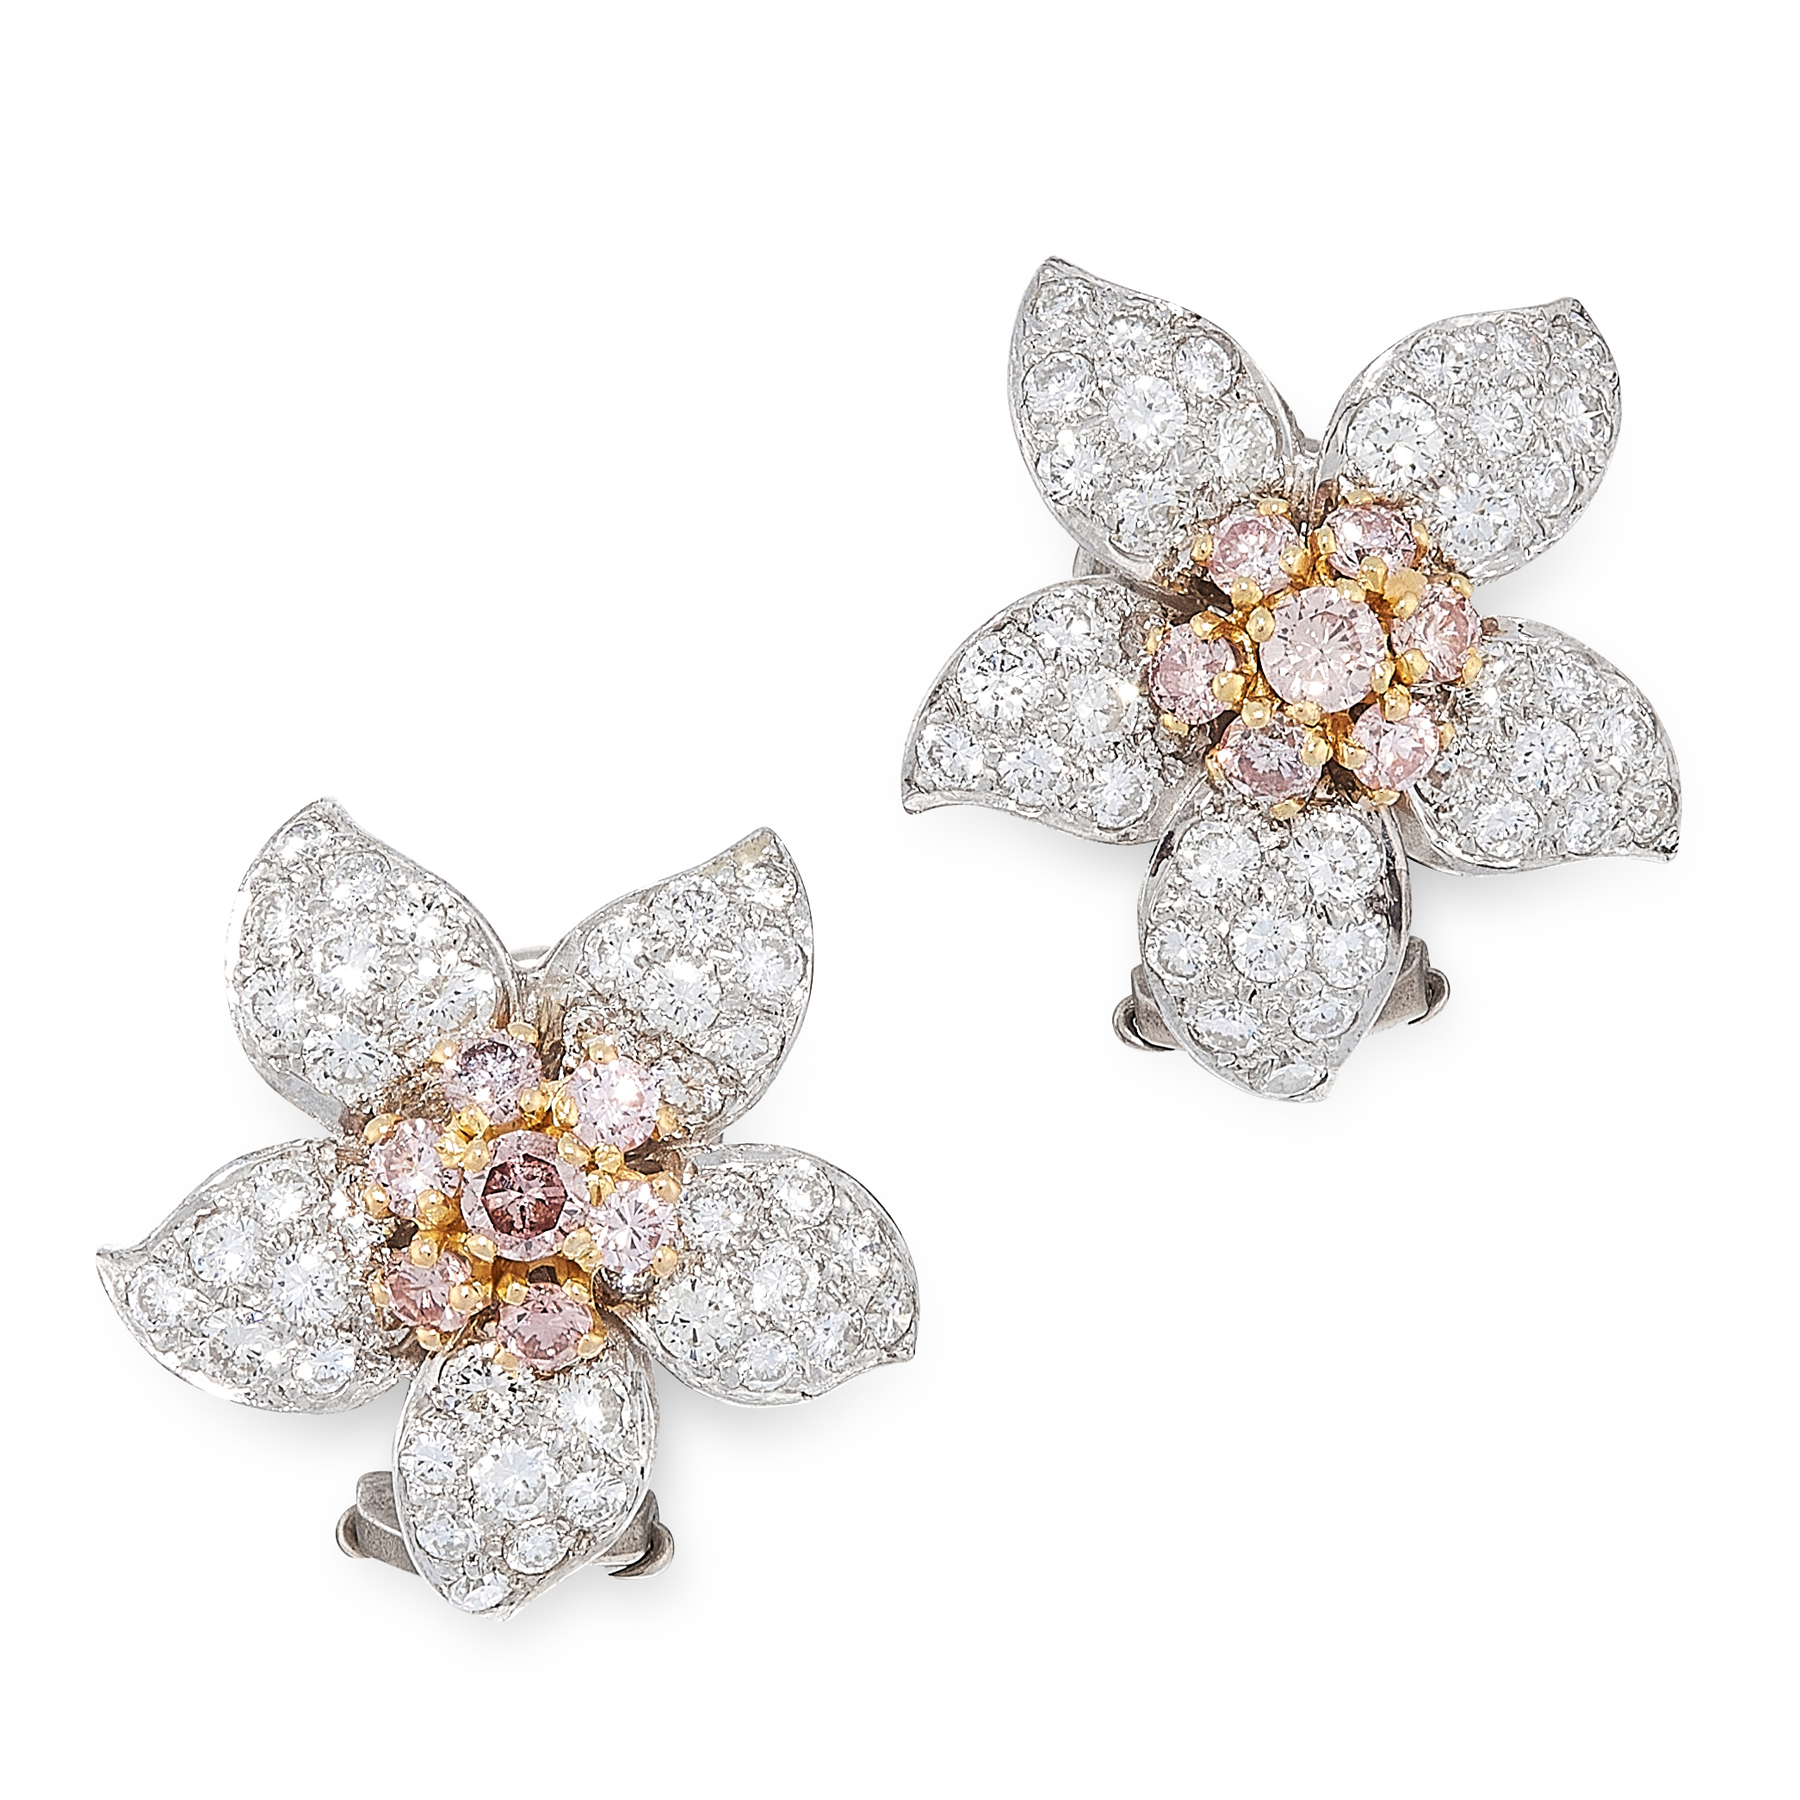 A PAIR OF FANCY PINK AND WHITE DIAMOND EARRINGS in 18ct white gold, each designed as a flower, set